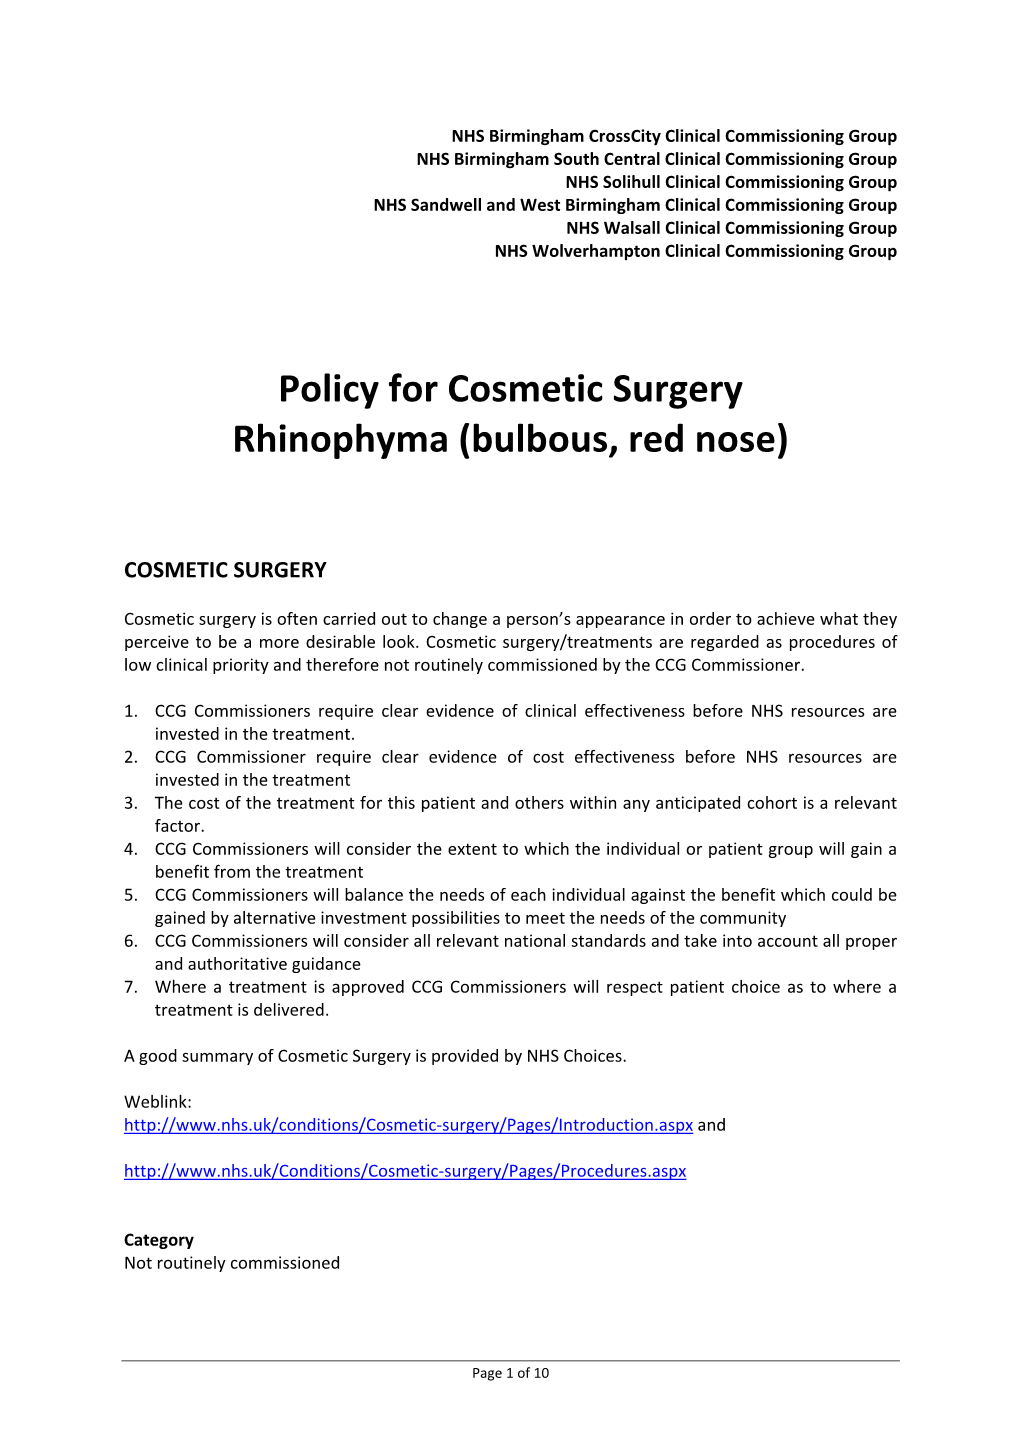 Policy for Cosmetic Surgery Rhinophyma (Bulbous, Red Nose)